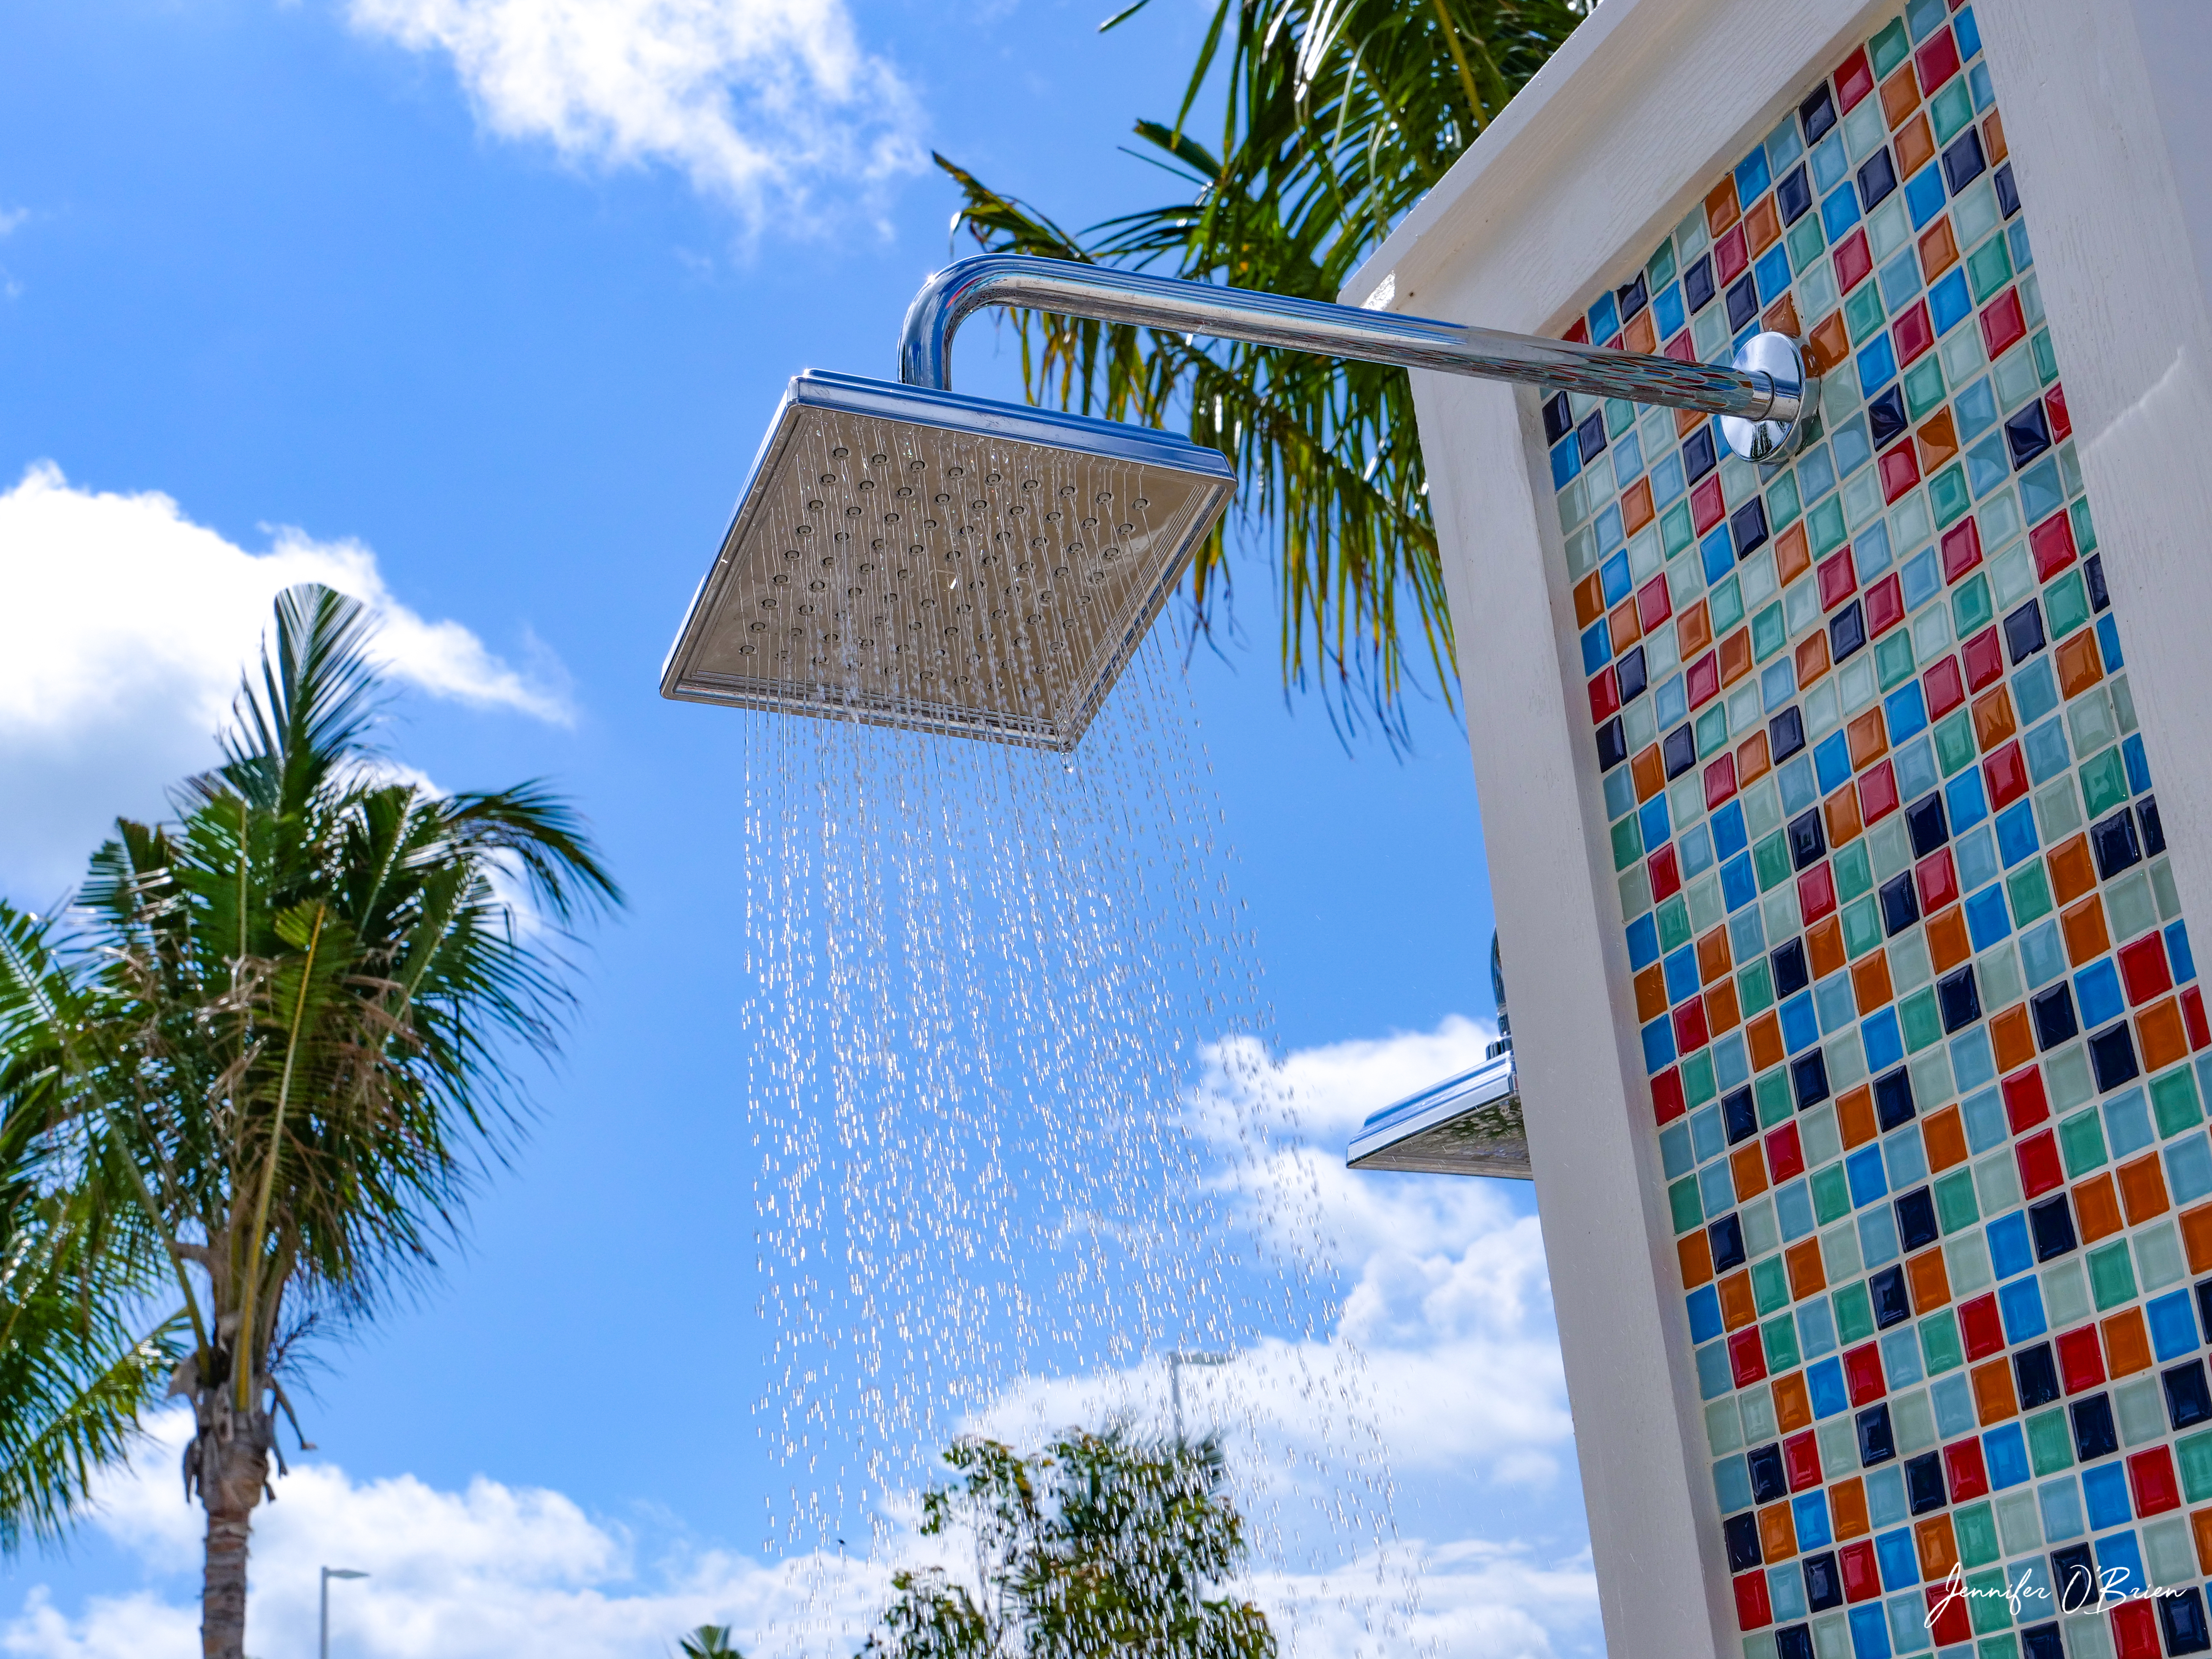 Shower Instagram Guide to CoCo Cay Royal Caribbean Cruise Island